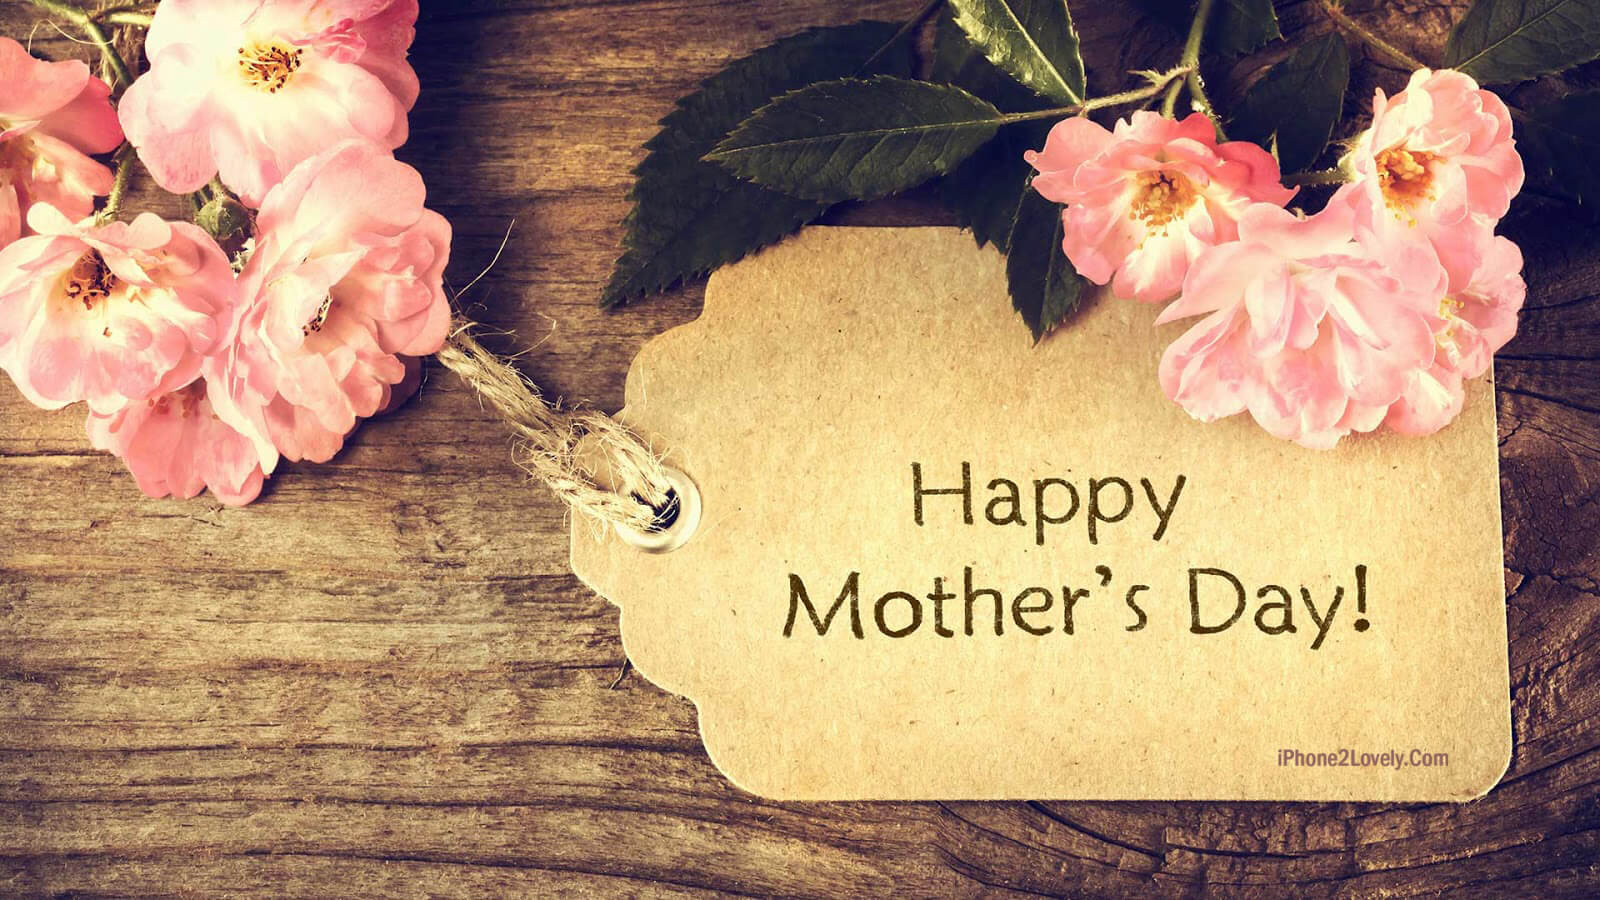 Cute Vintage Mothers Day Wallpaper Hd Free - Happy Teachers Day Photos Download - HD Wallpaper 